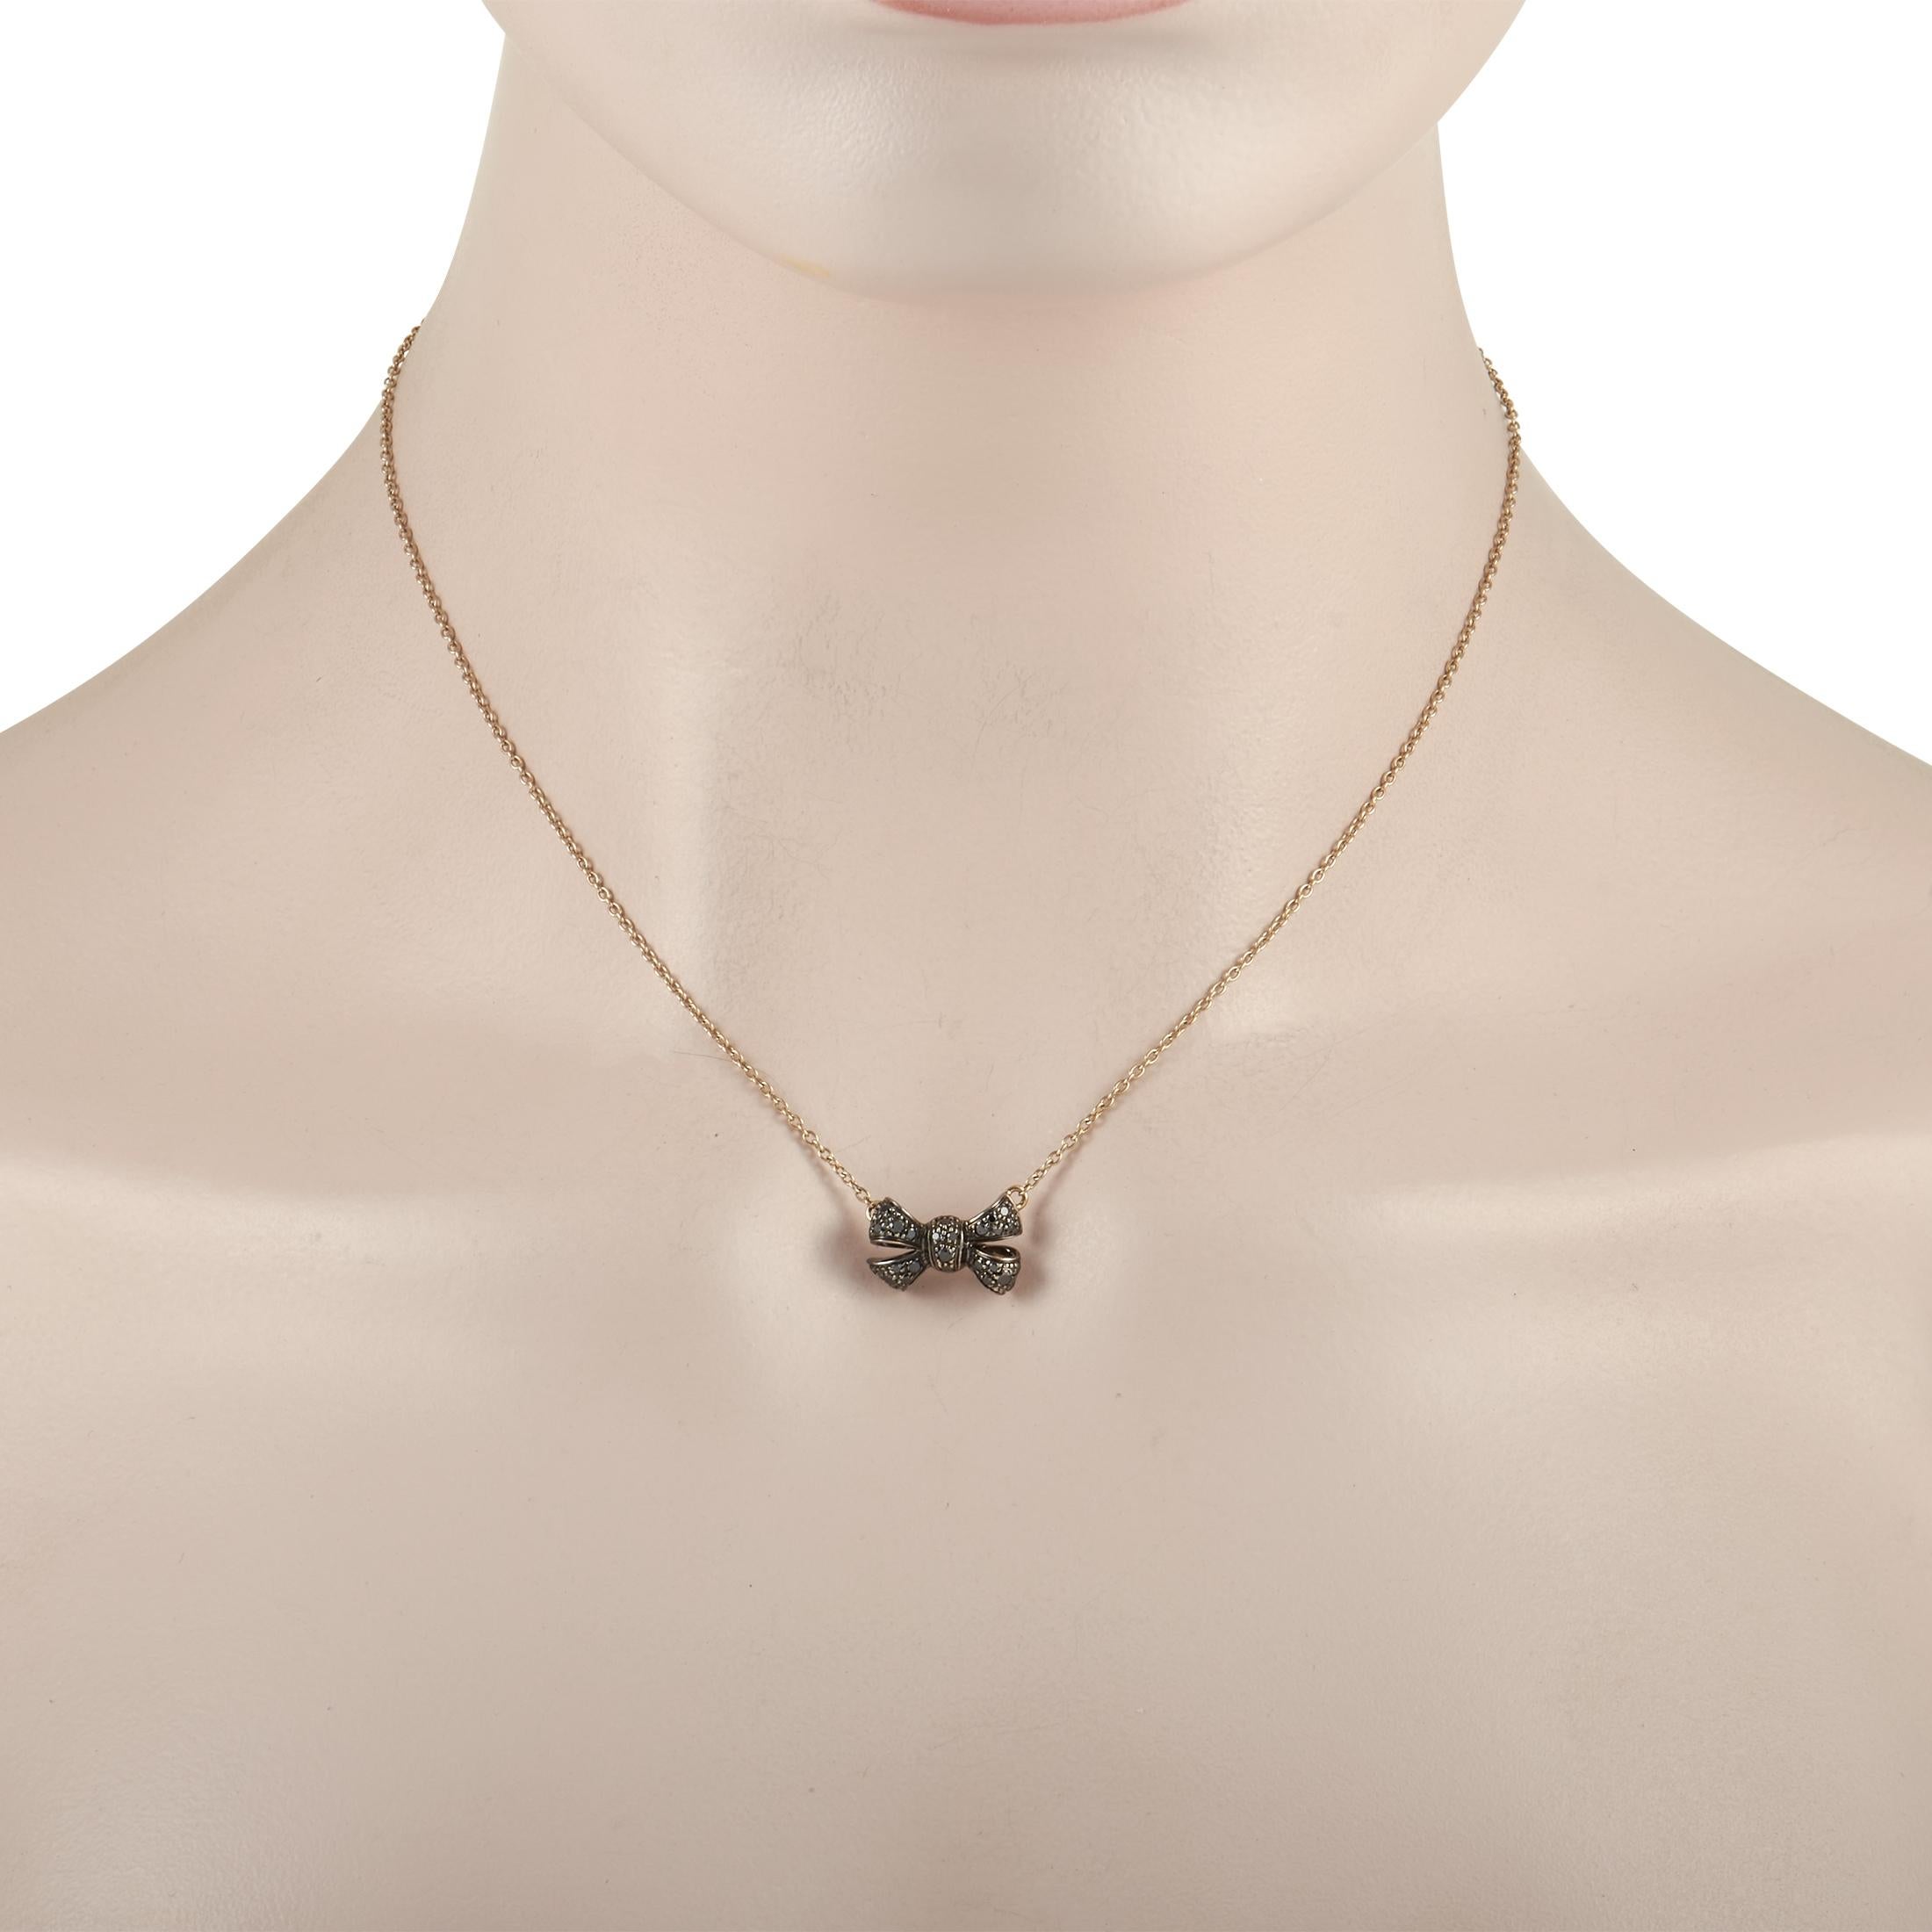 A sweet, feminine design makes this Pomellato Forever necklace an elegant way to elevate your everyday wardrobe. A beautiful pairing of 18K Rose Gold and 18K White Gold come together to act as a luxurious foundation for this poised piece of jewelry.